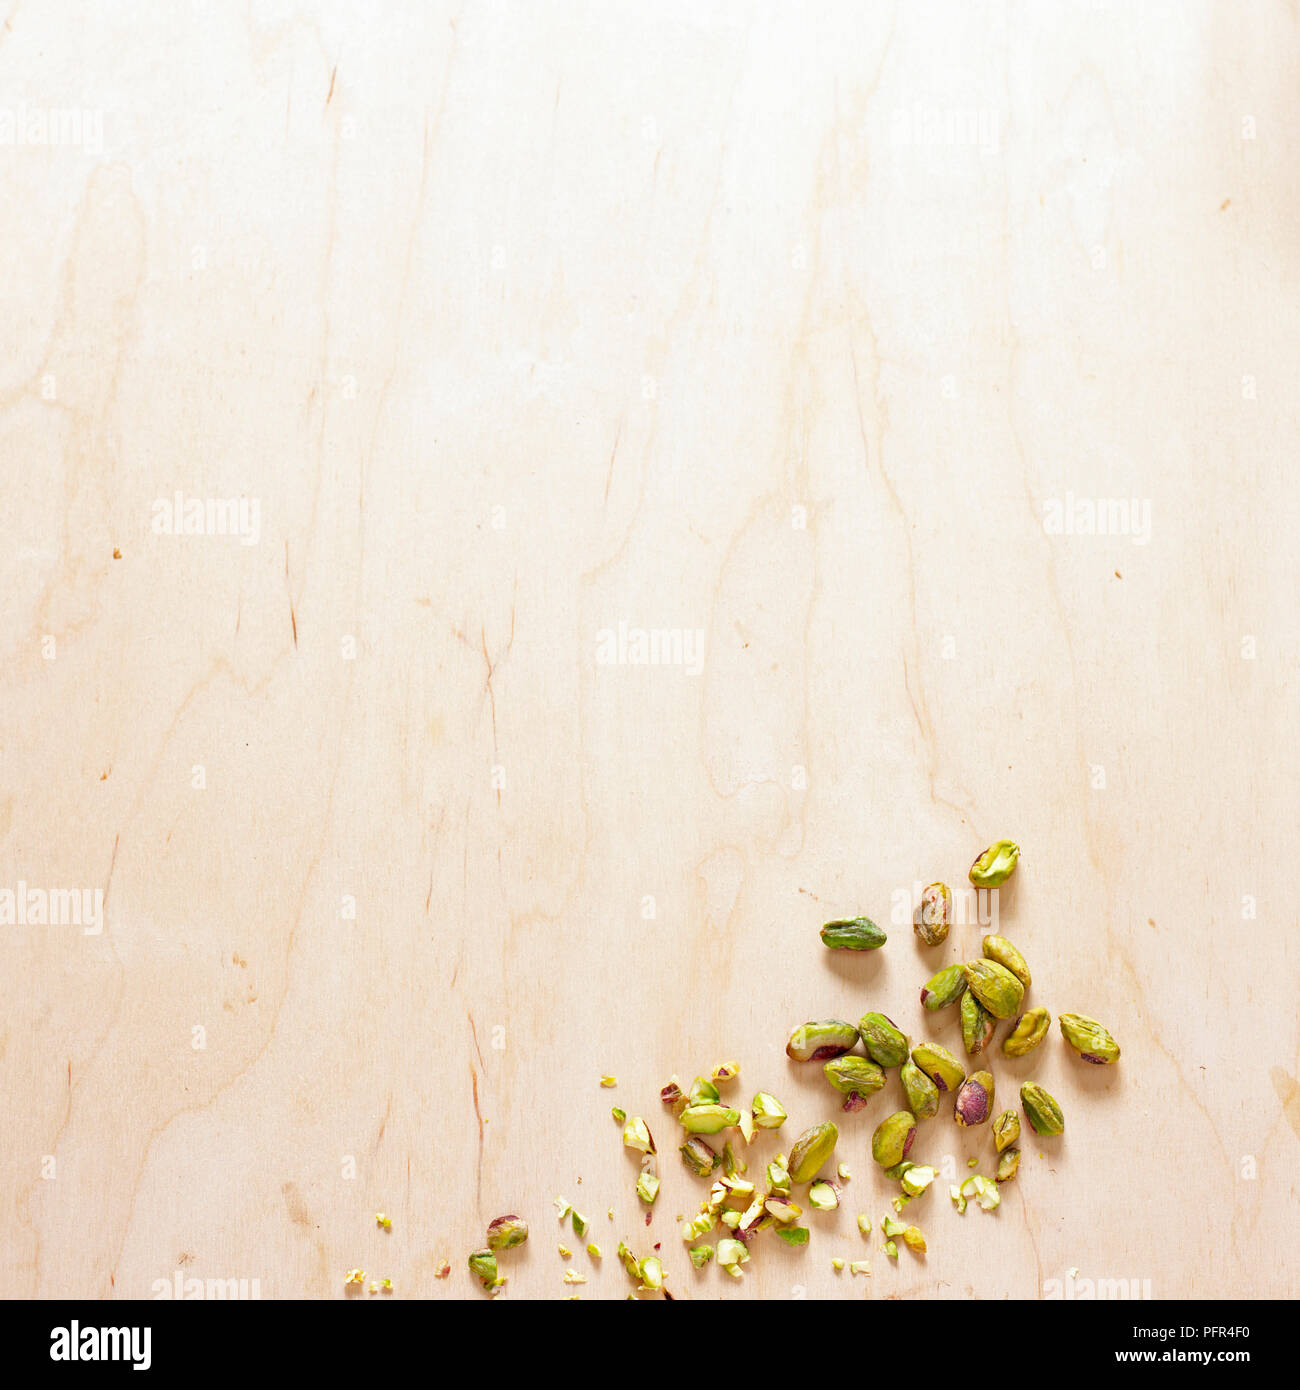 Pistachio nuts on wooden surface Stock Photo